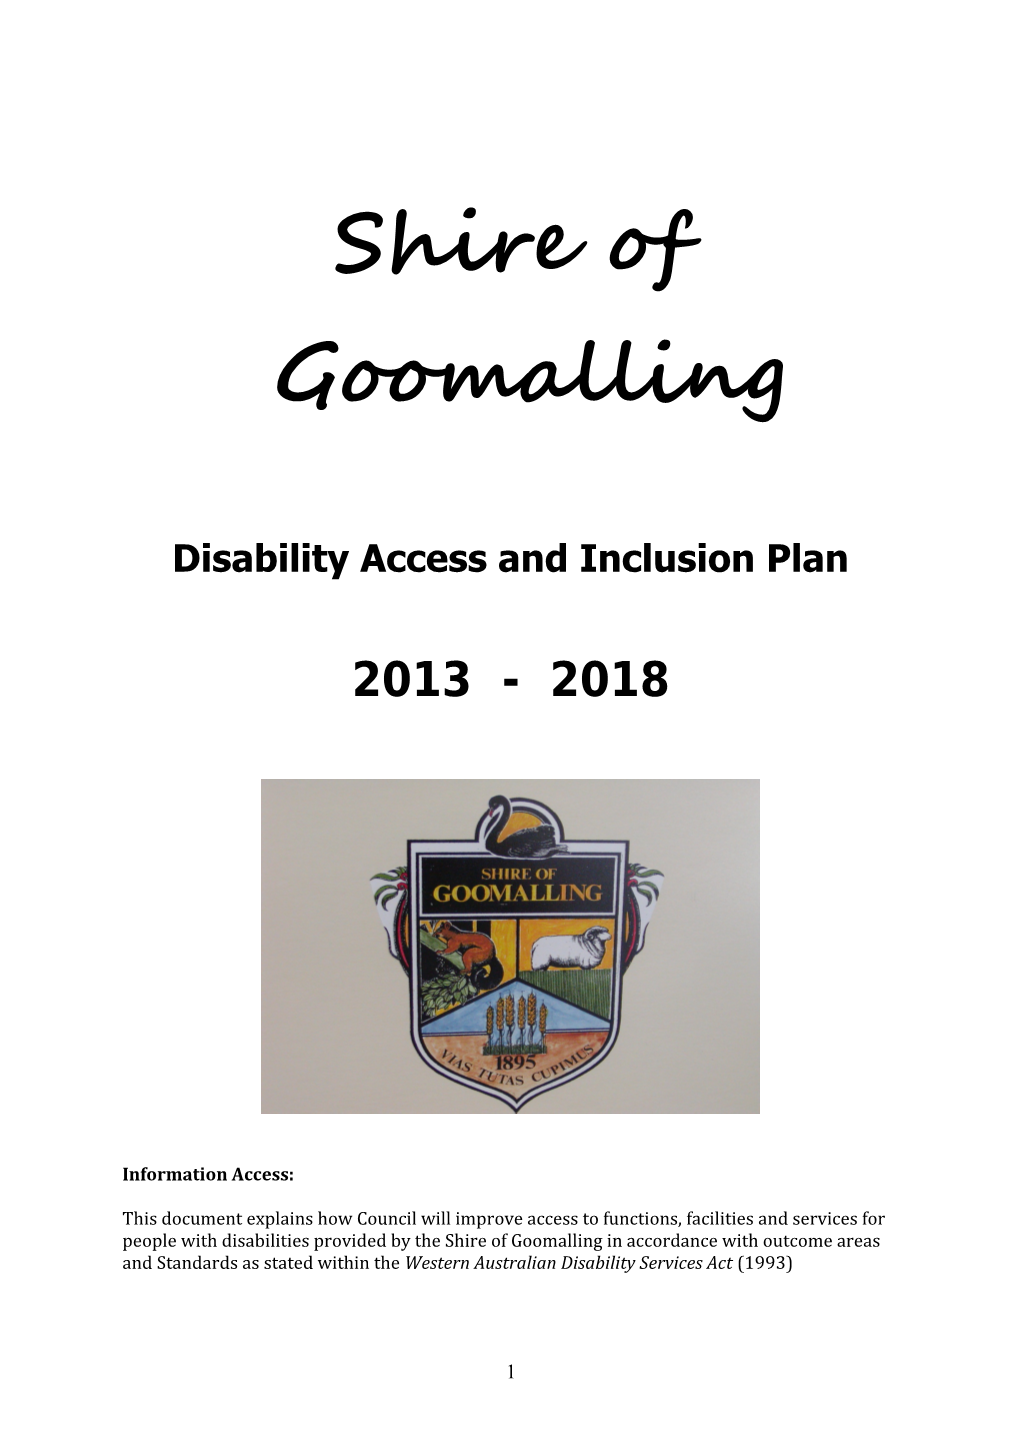 Disability Access and Inclusion Plan s2